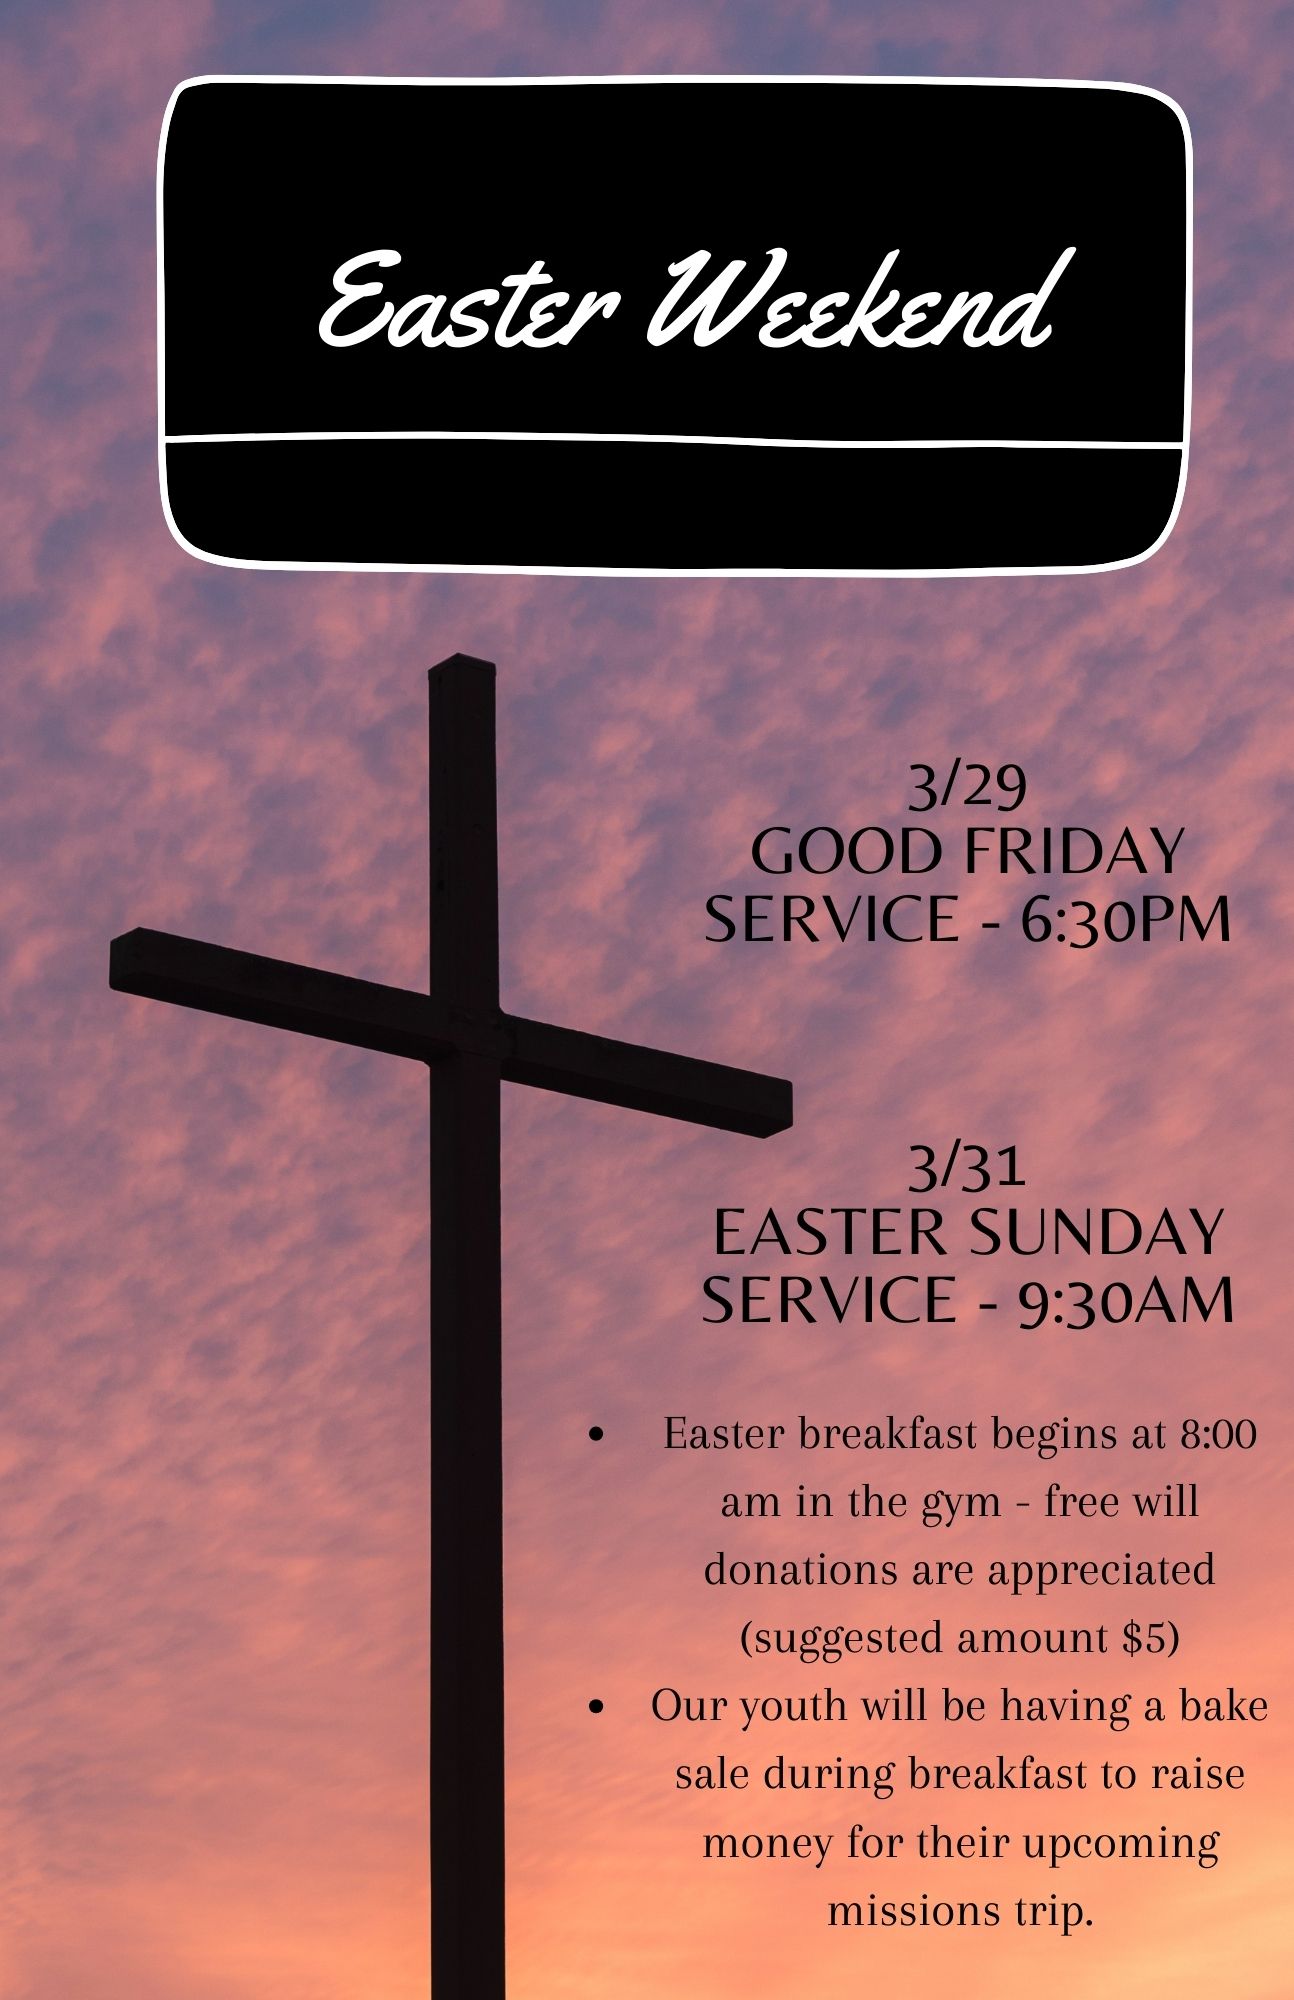 Easter weekend poster image